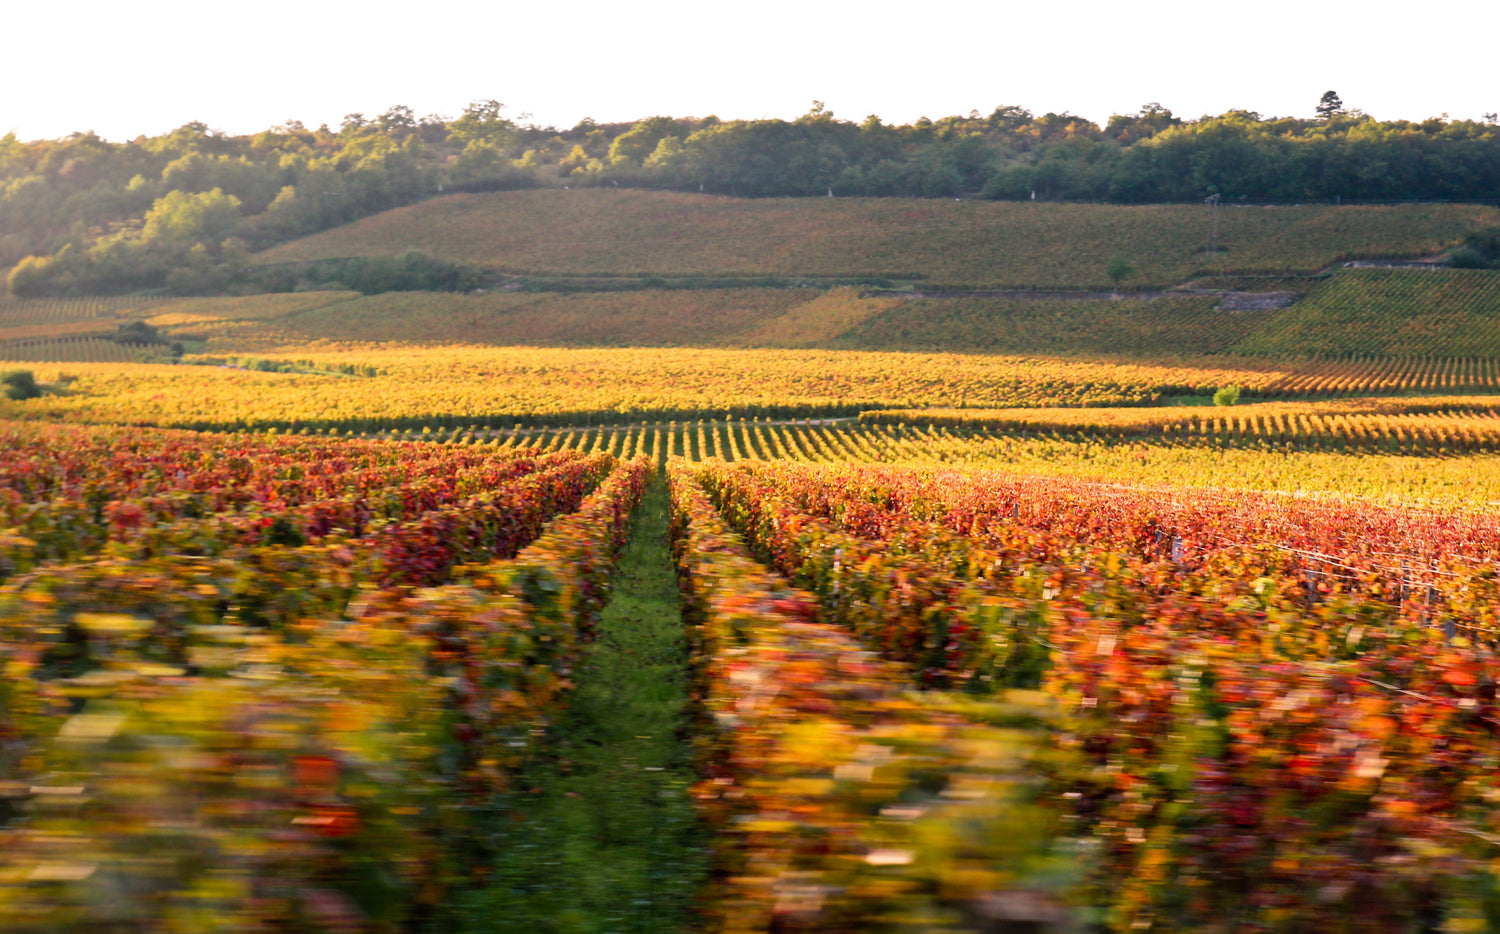 Côte d'Or, meaning Golden Slope - The Côte de Nuits and Côte de Beaune are the most important regions in Burgundy.